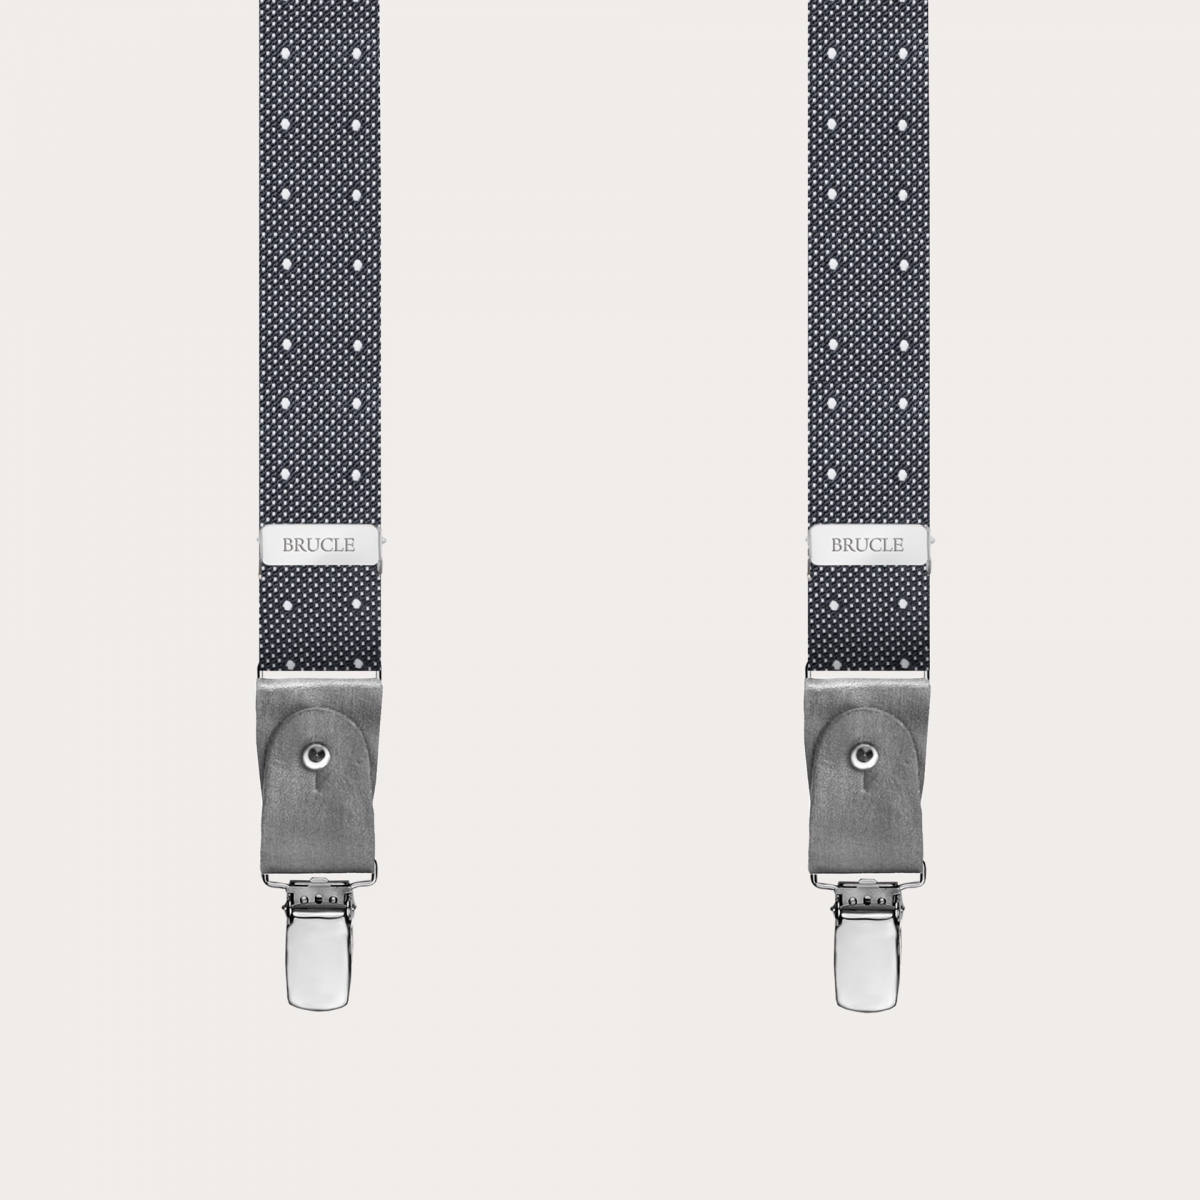 BRUCLE Thin suspenders in grey polka dot jacquard silk with hand-colored leather parts